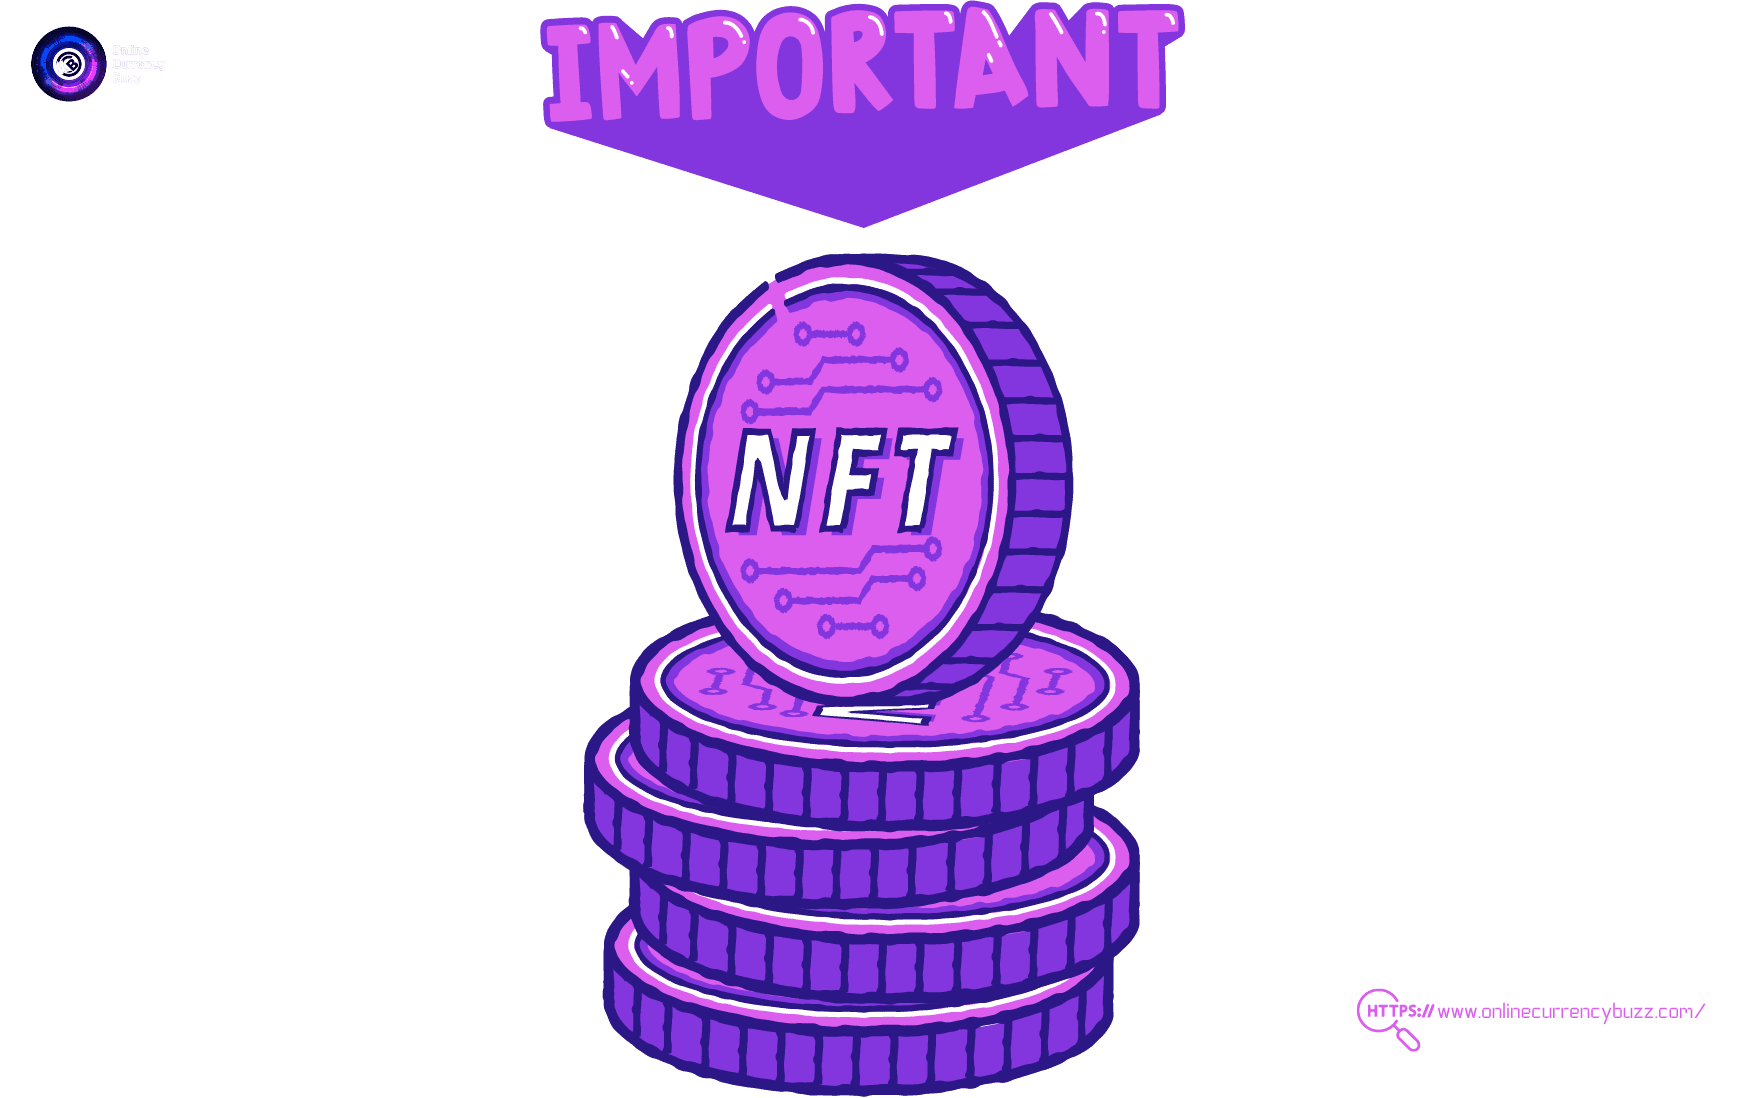 Why Is NFT important?